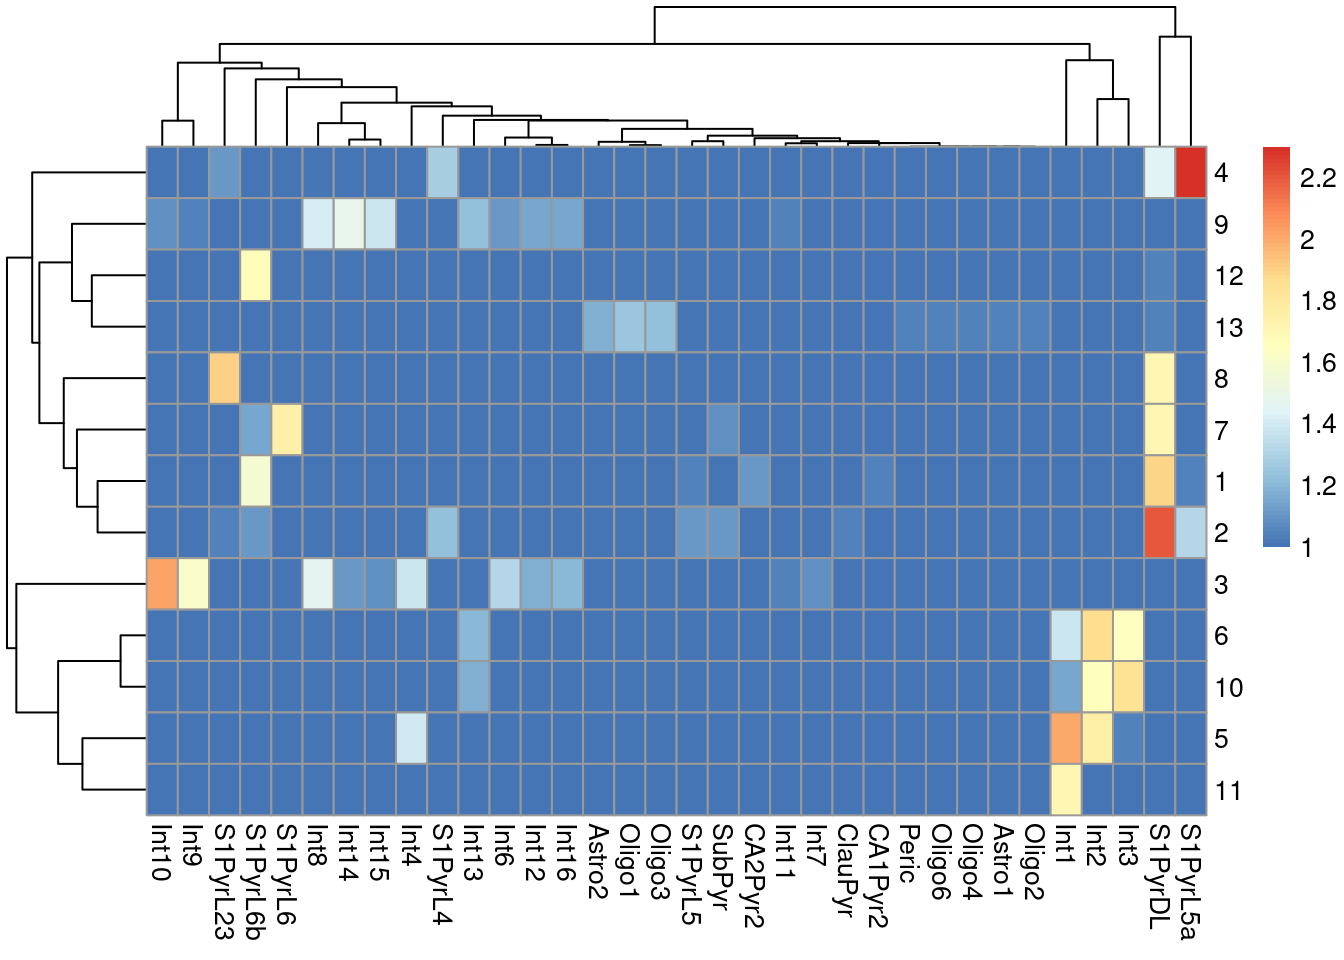 Heatmap of the log-transformed number of cells in each combination of label (column) and cluster (row) in the Tasic dataset.